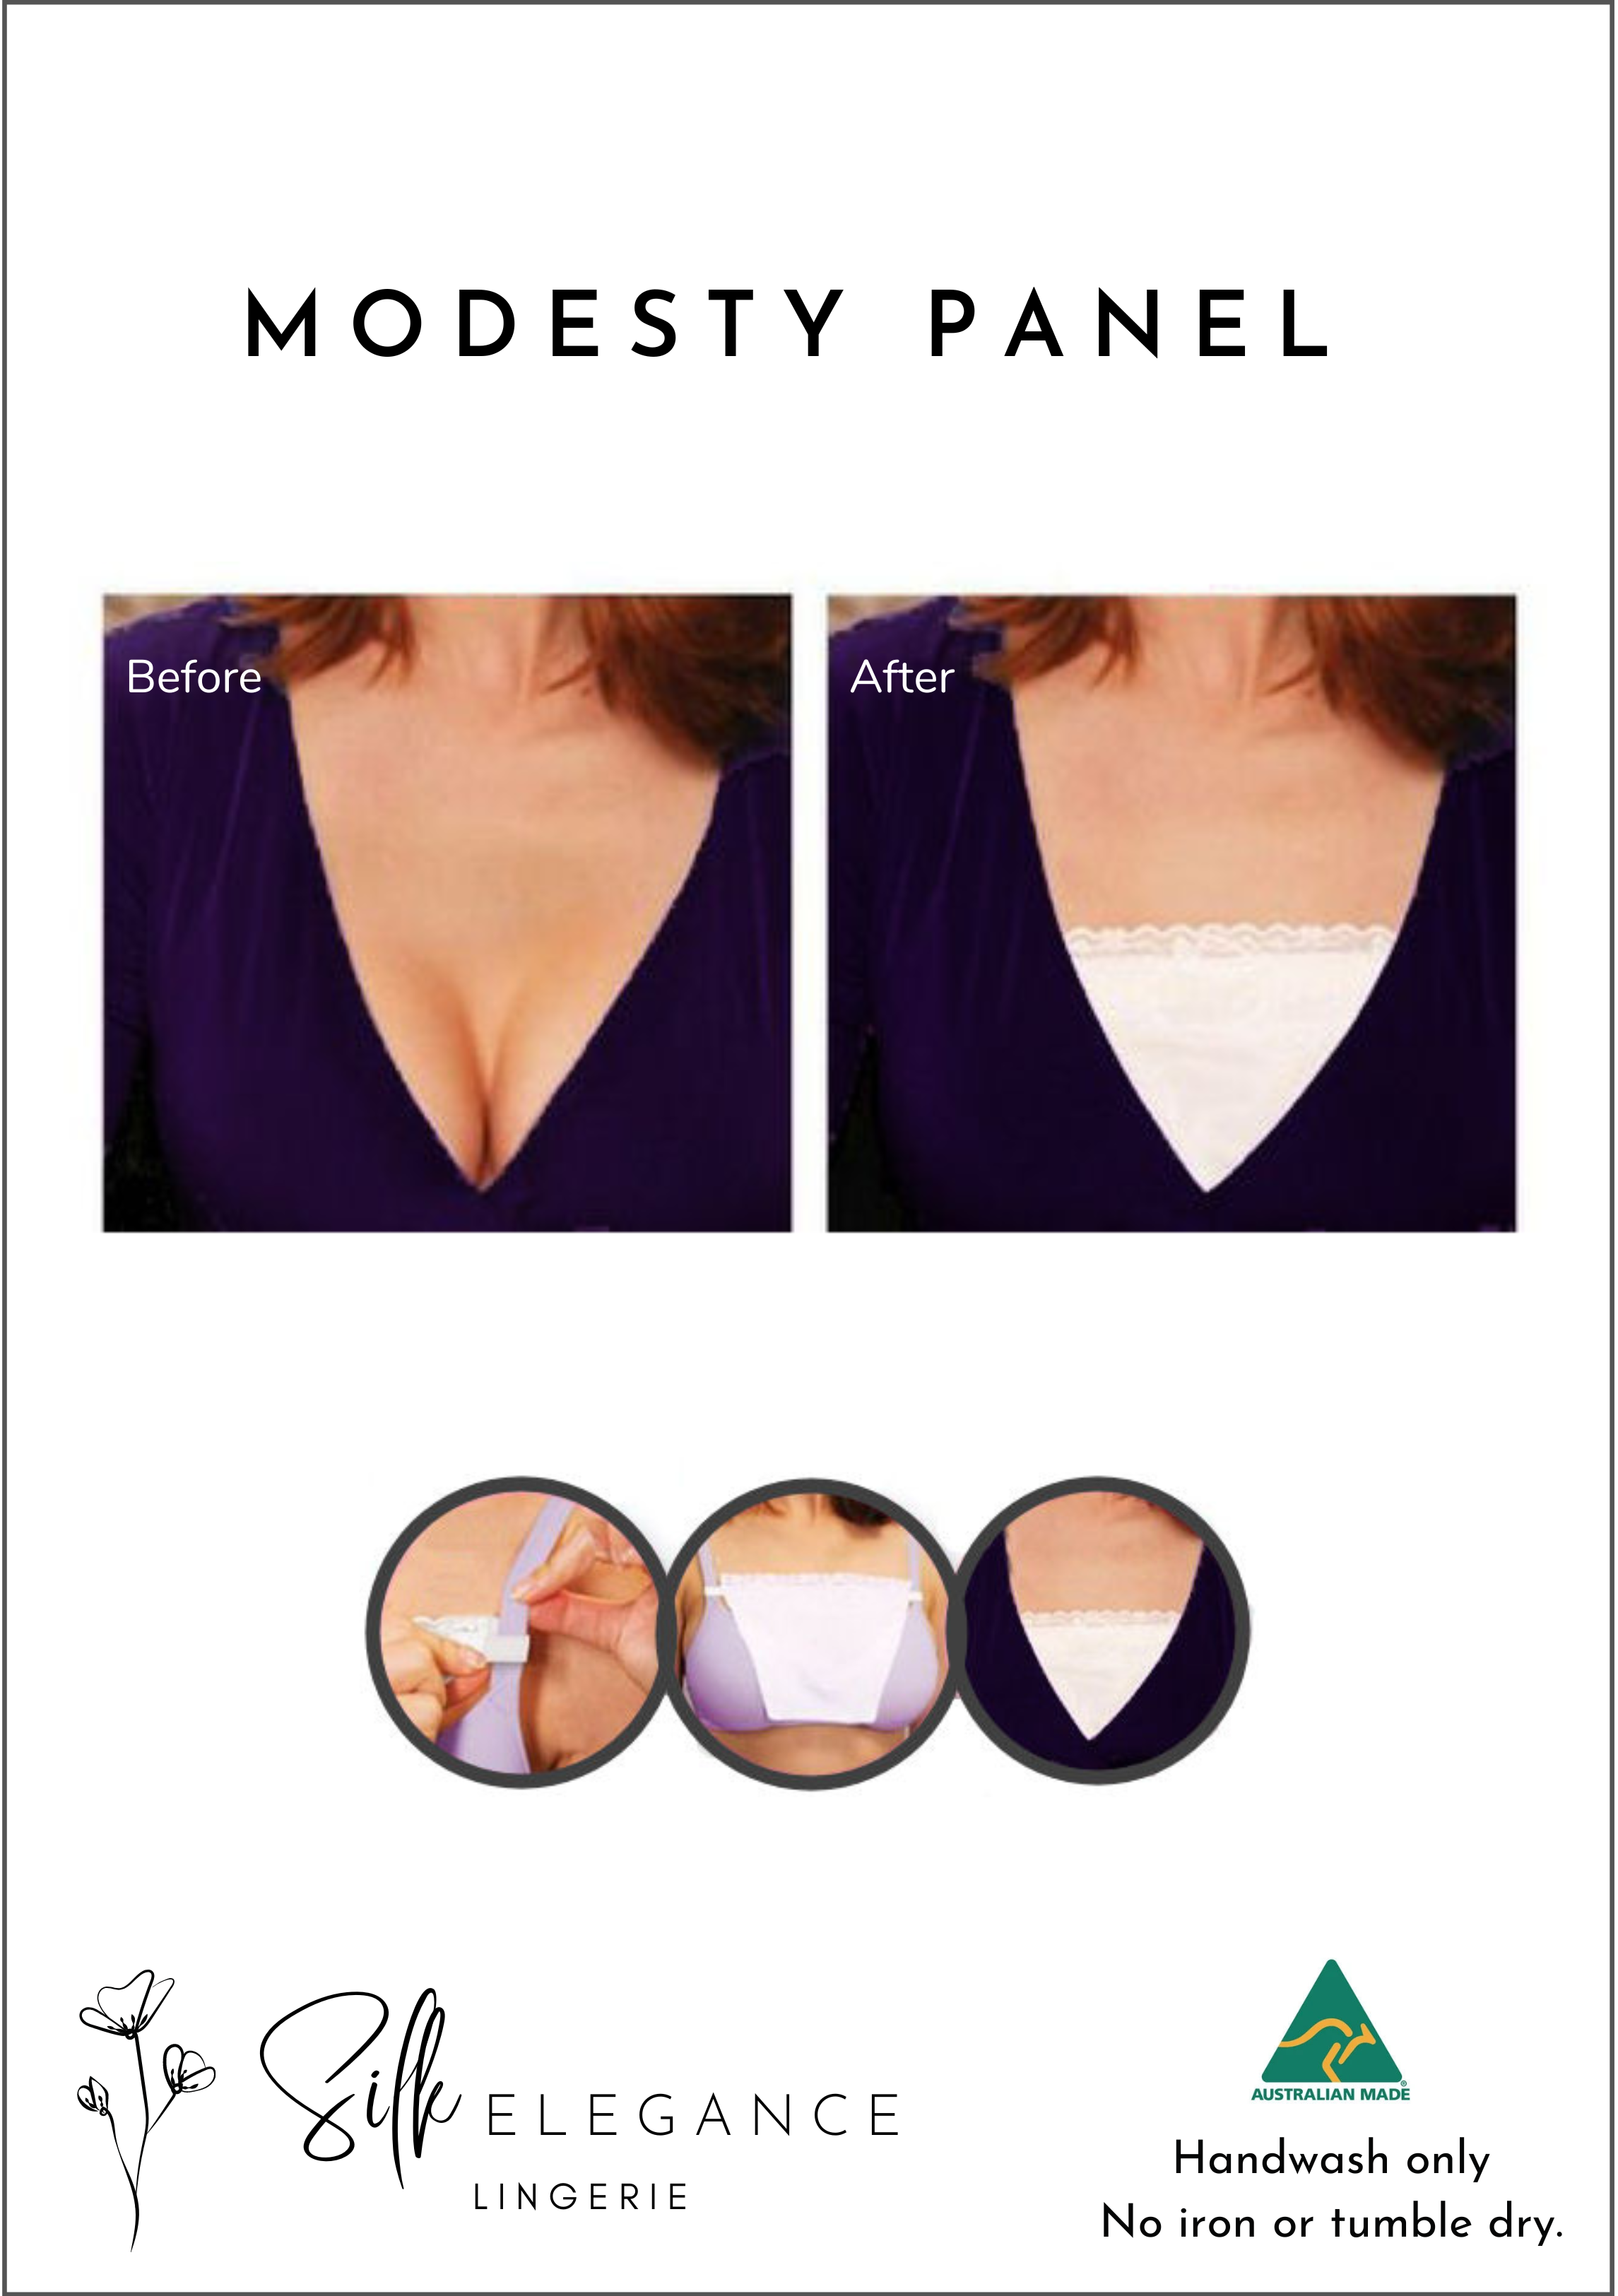 Modesty panels with lace trim covers cleavage